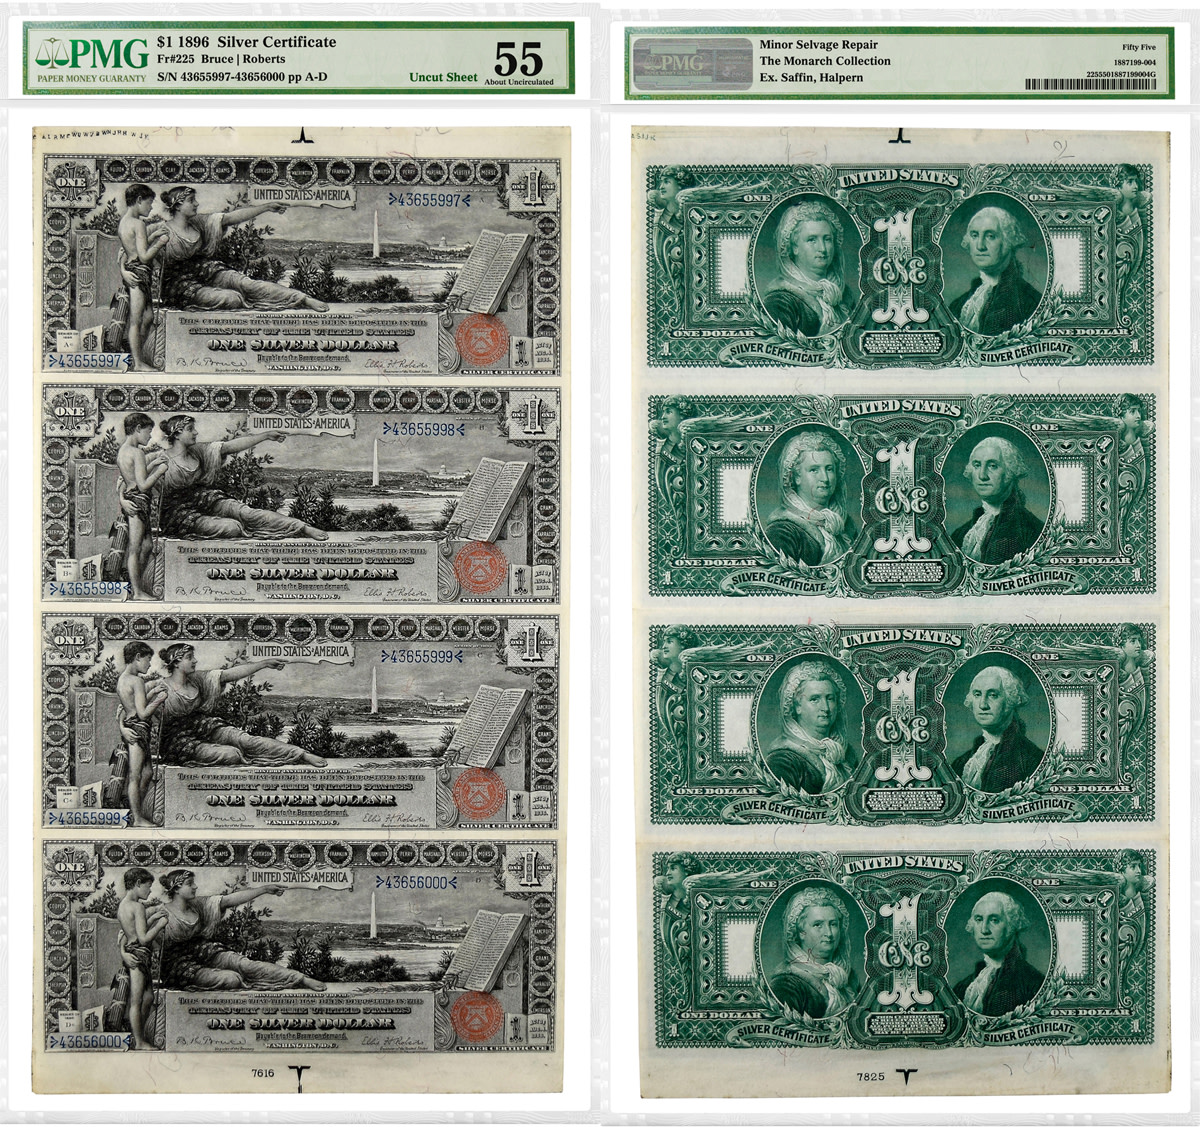 Uncut sheet of four 1896 $1 Silver Certificates graded PMG 55 About Uncirculated.